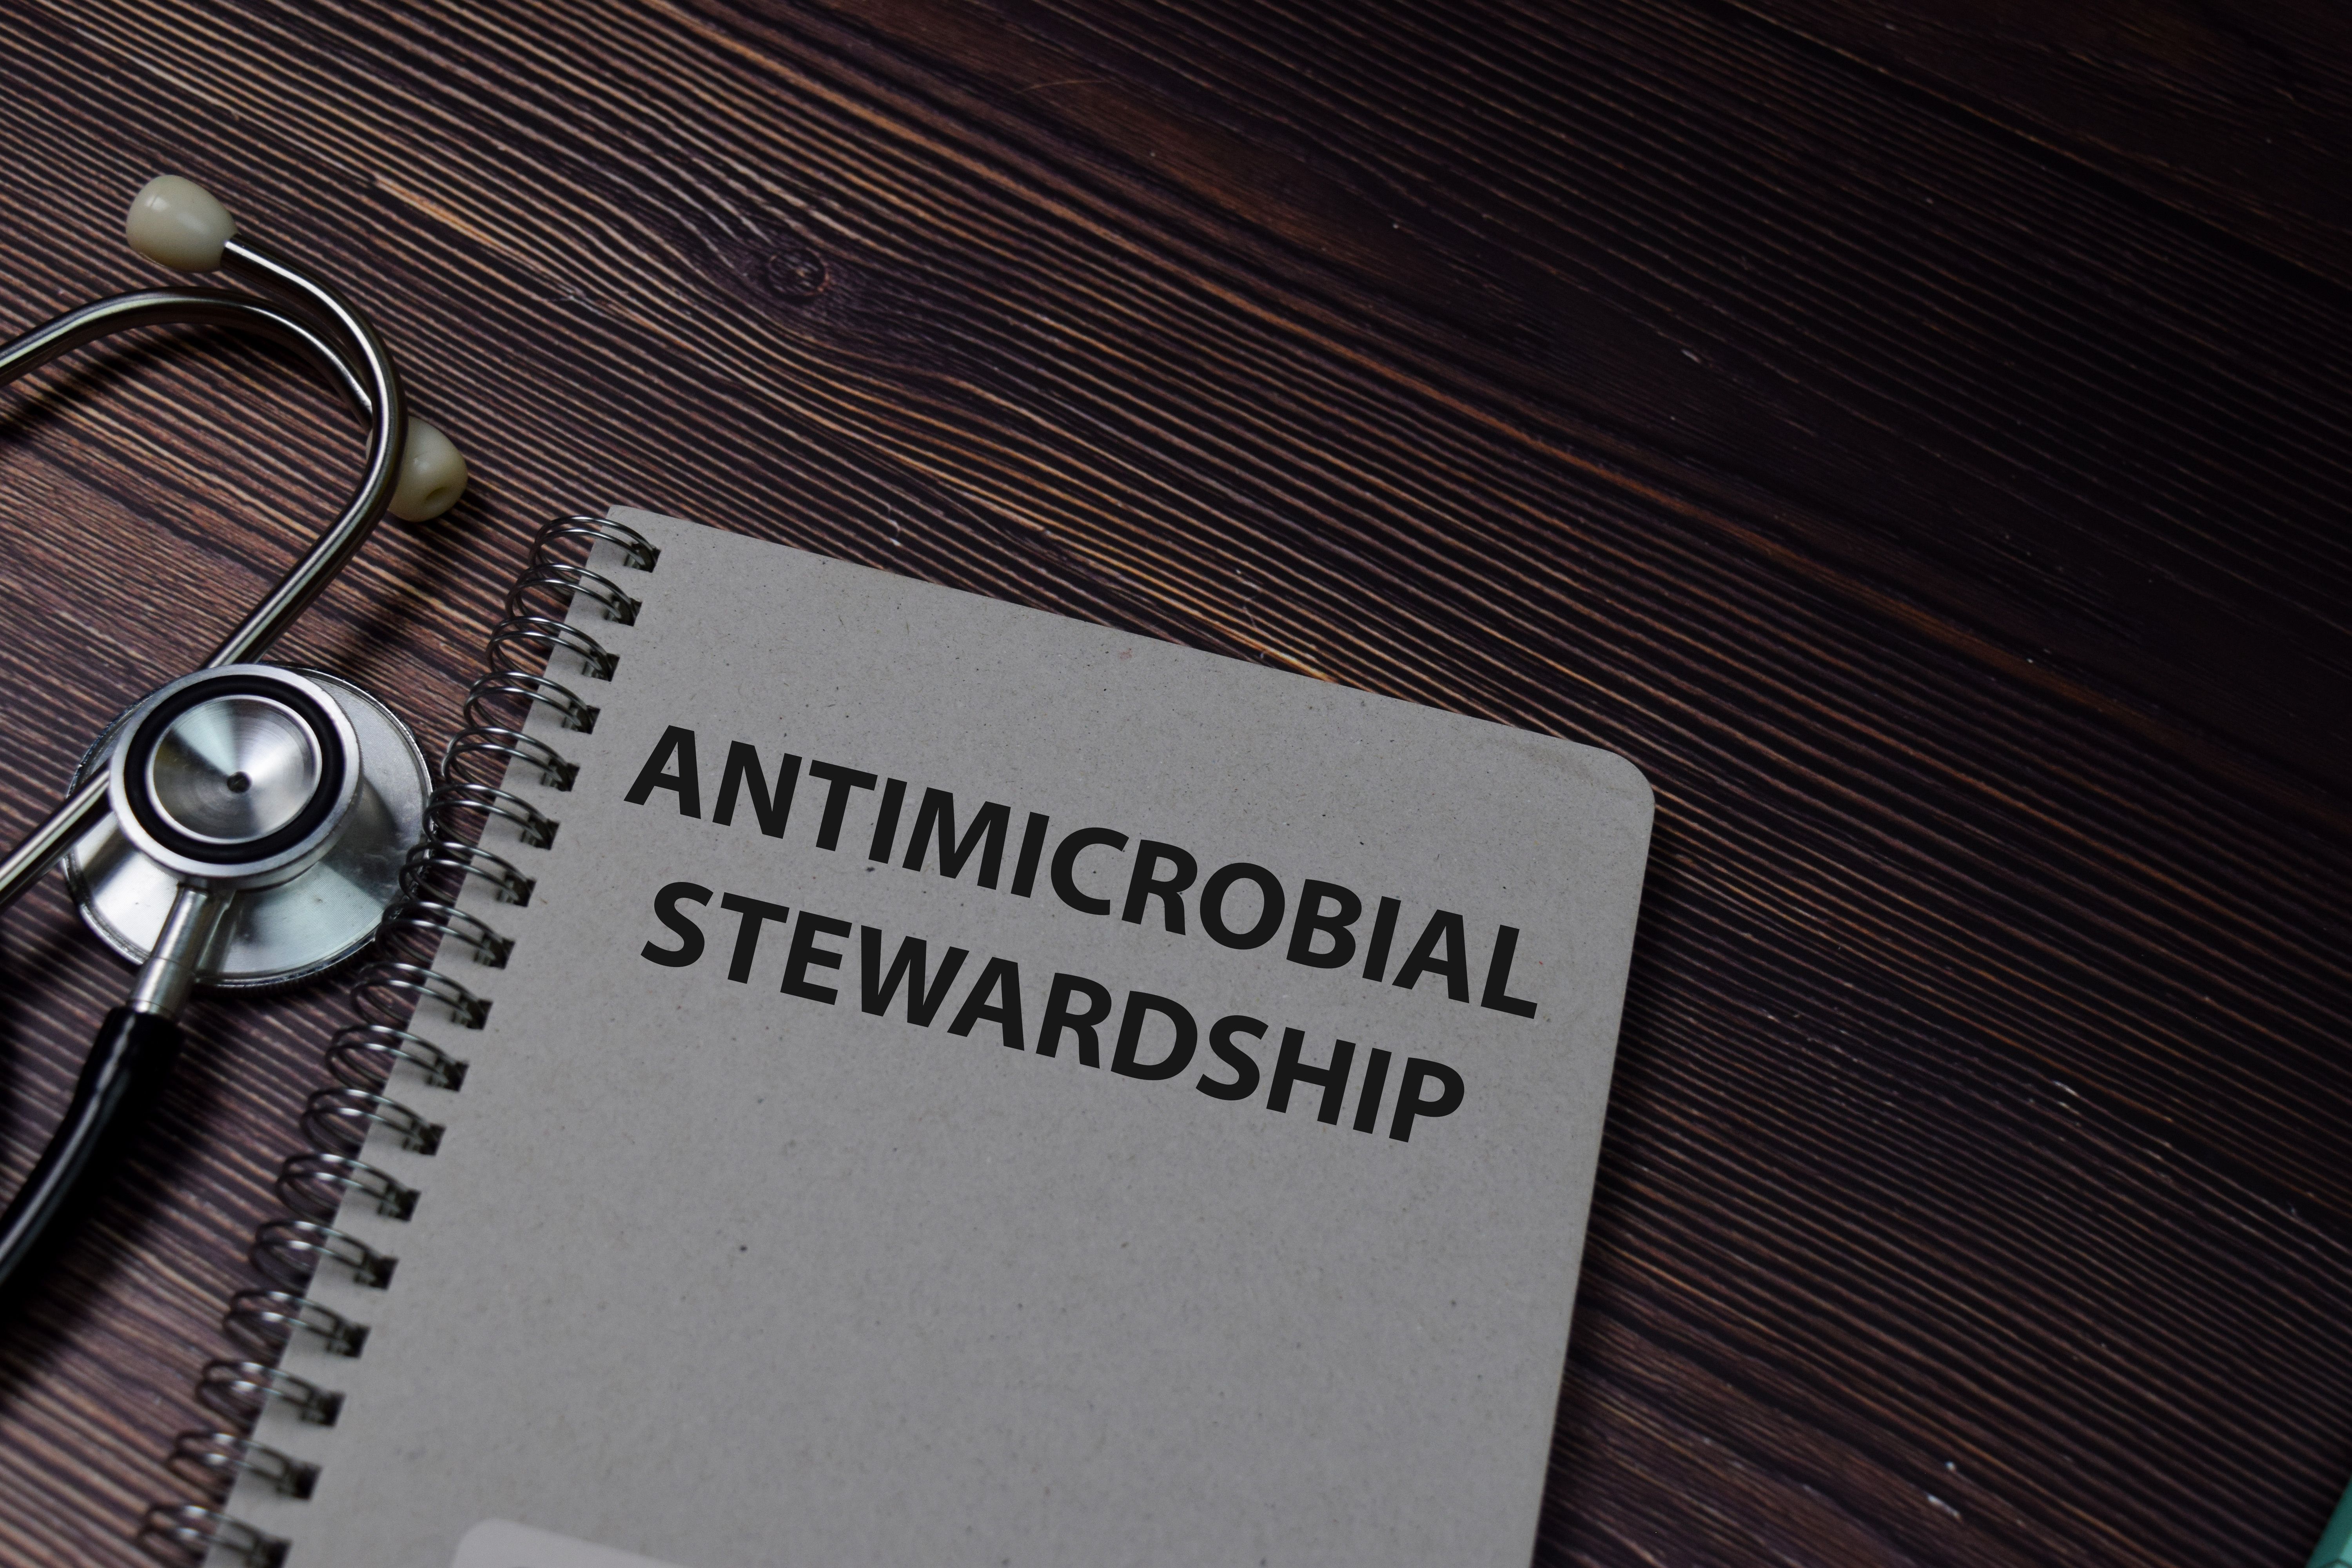 Antimicrobial stewardship efforts, such as education for healthcare providers, significantly decreased community-acquired pneumonia antibiotic prescriptions in COVID-19 patients.